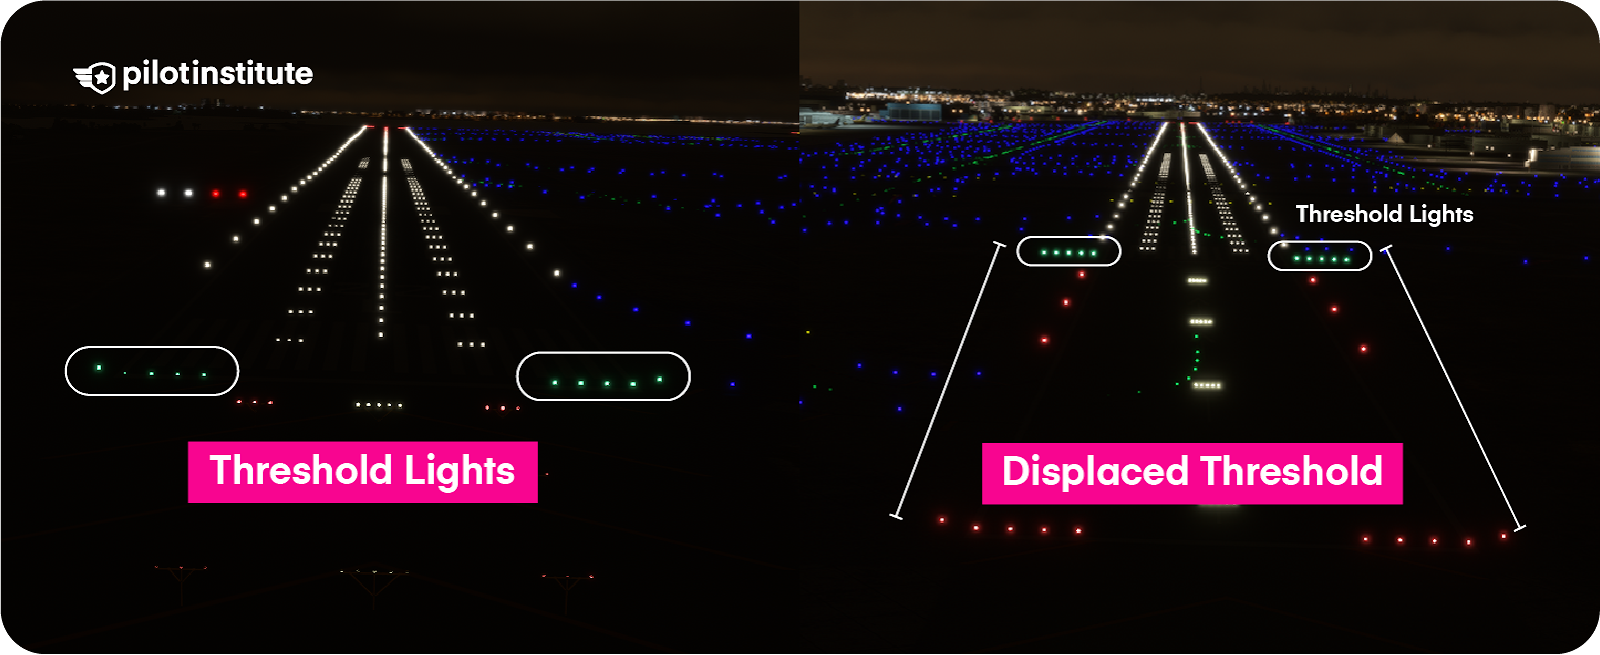 Threshold lights on a normal runway and a runway with a displaced threshold. 